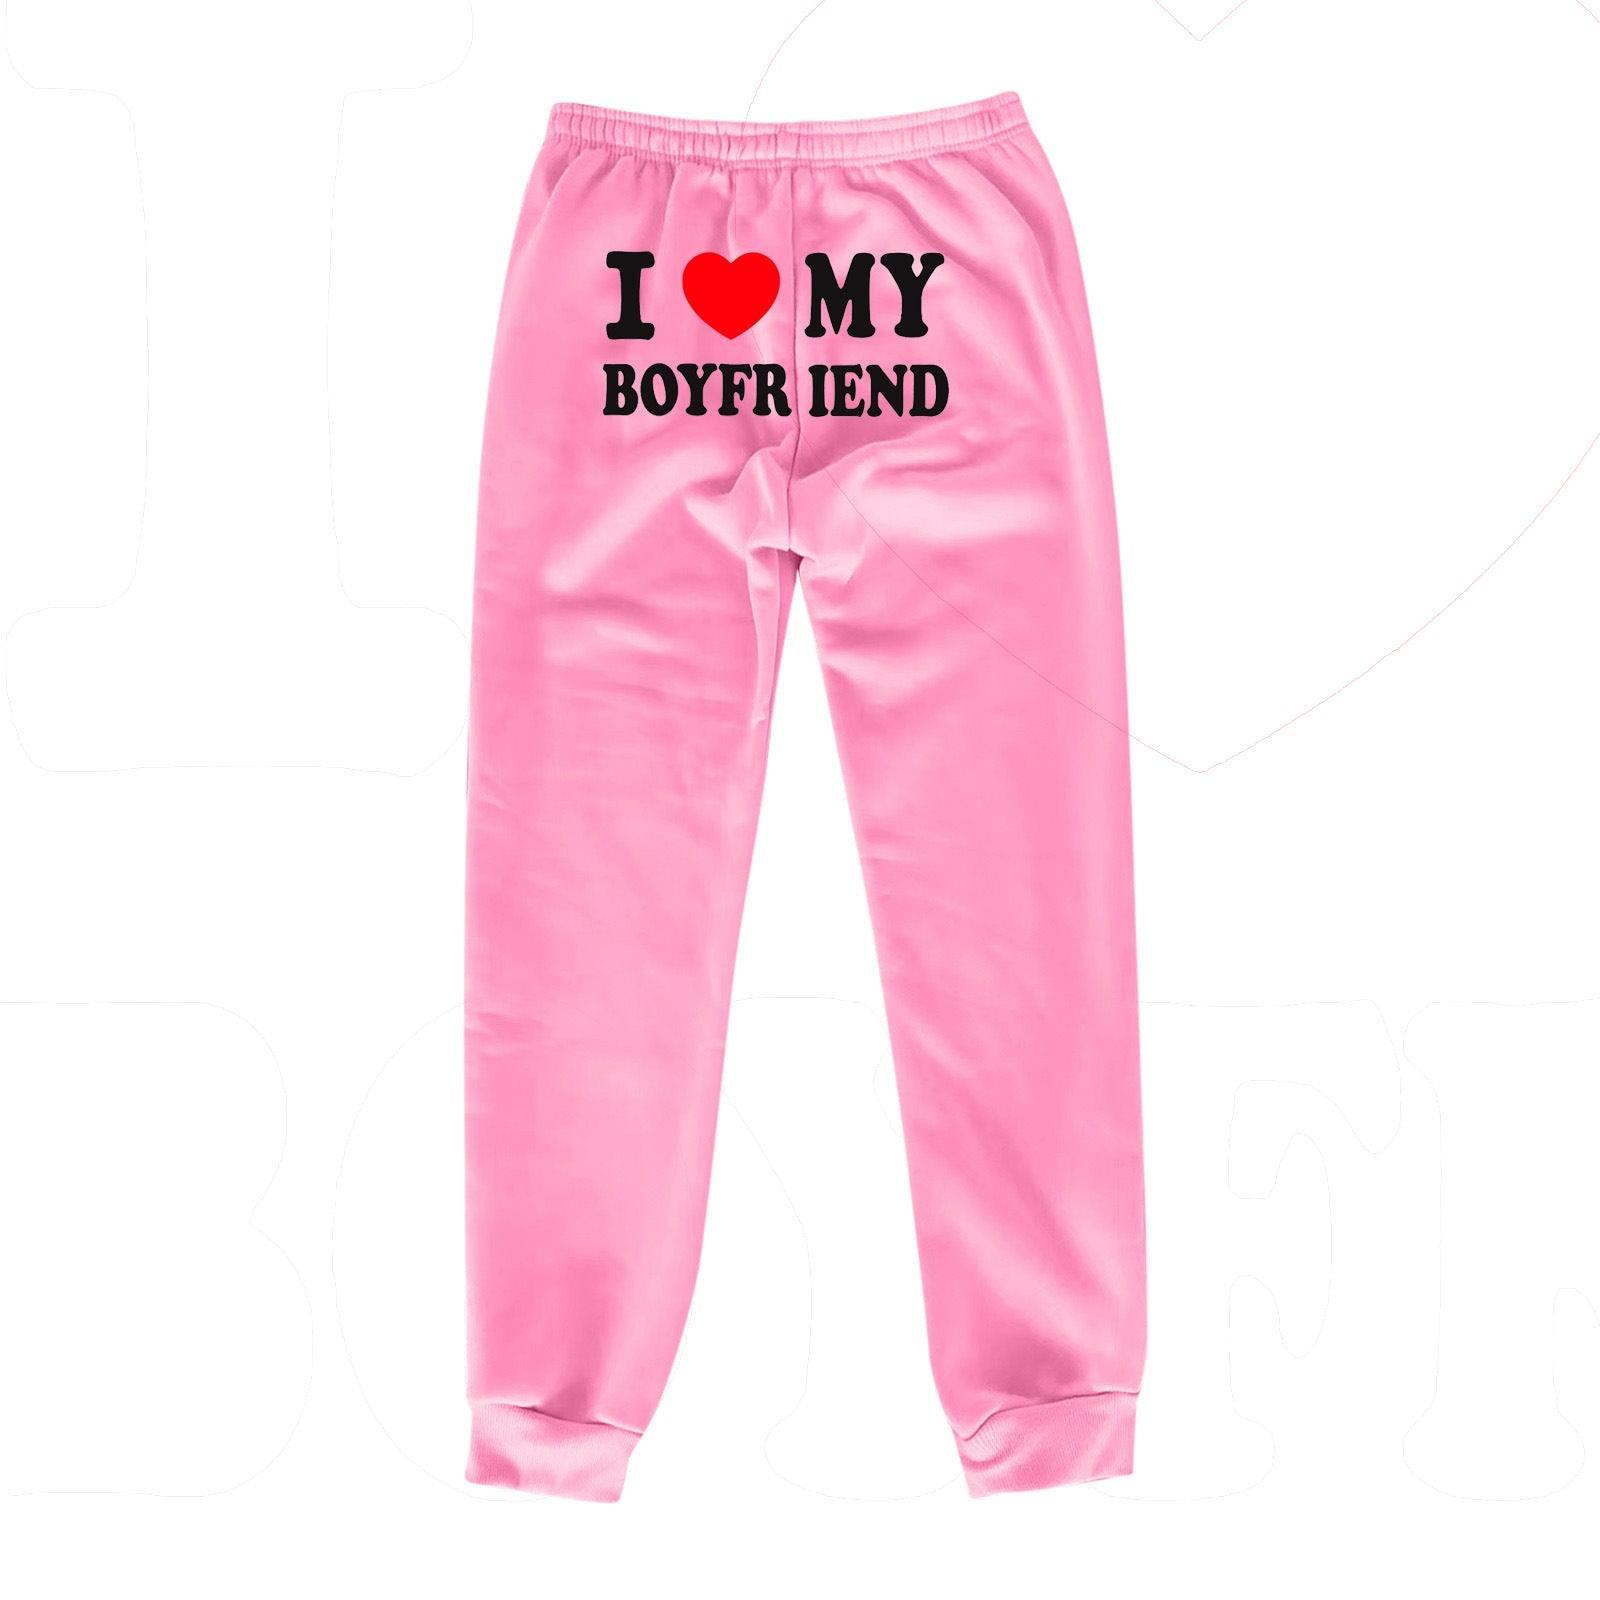 I Love MY BOYFRIEND Printed Trousers Casual Sweatpants Men-Pink and black letters-16